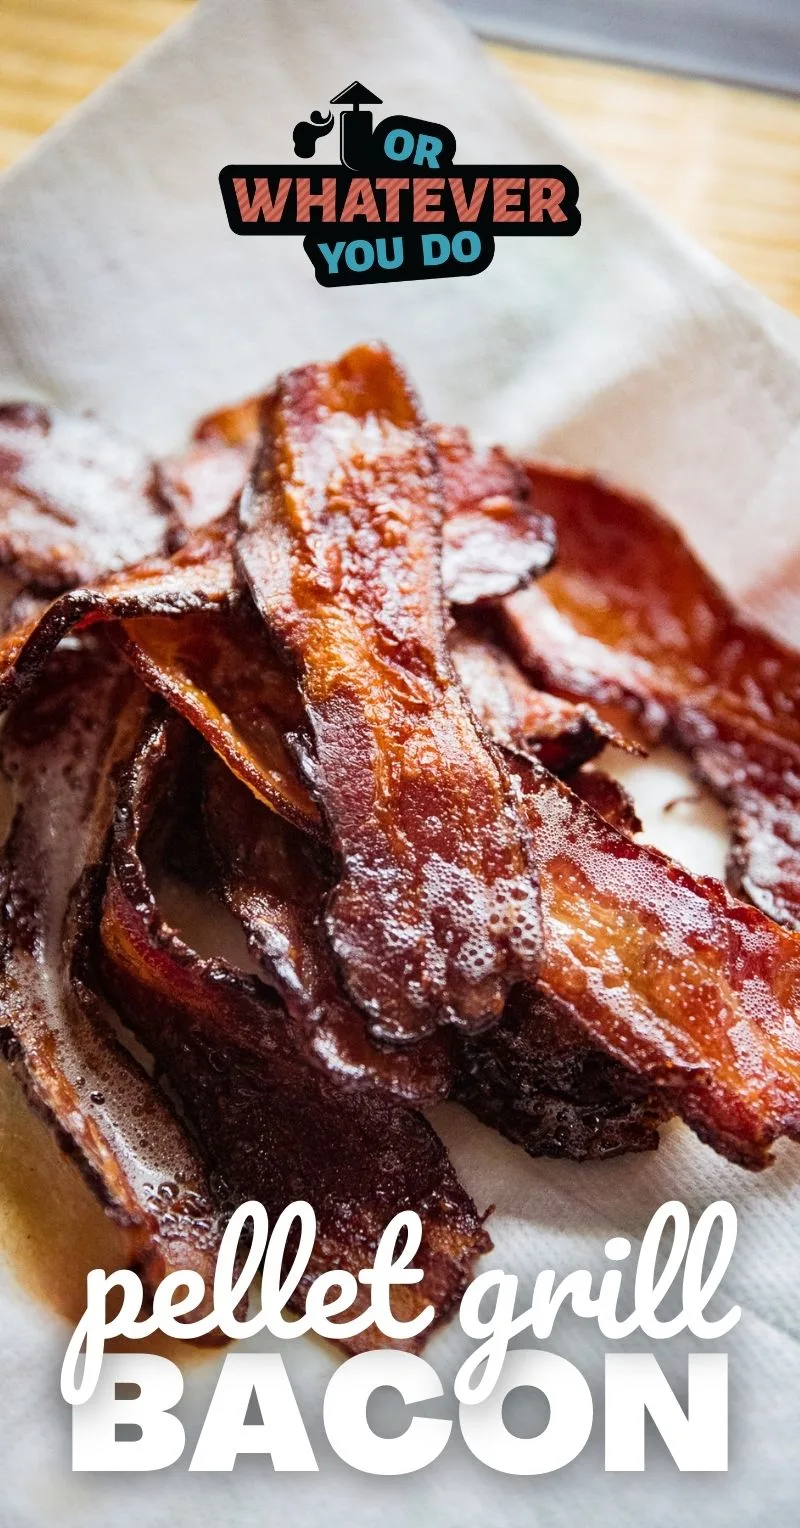 You've been making bacon wrong your entire life